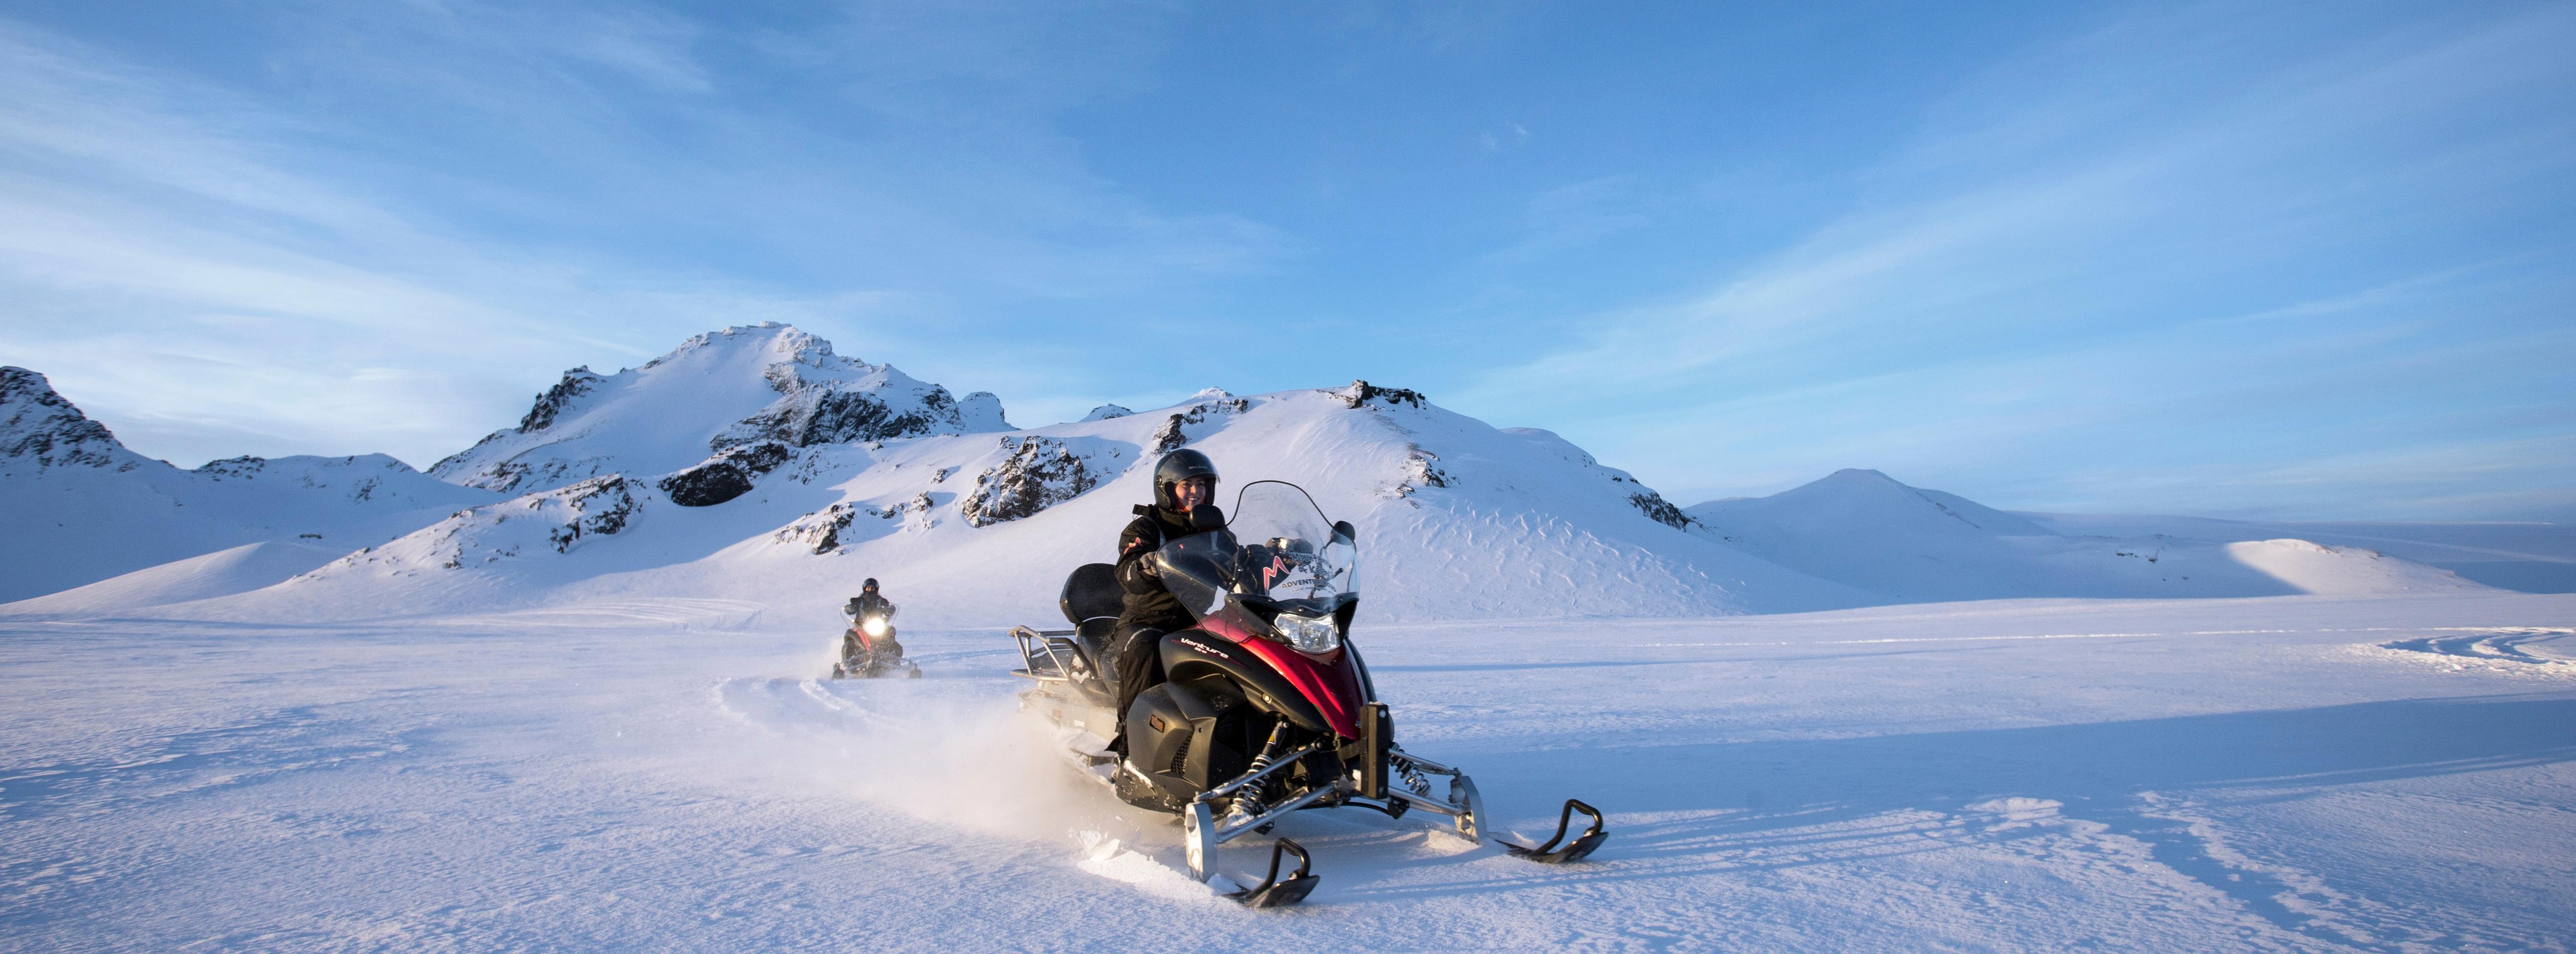 A day trip at Golden Circle with a snowmobile tour over the Langjökull glacier - leaving from Reykjavik